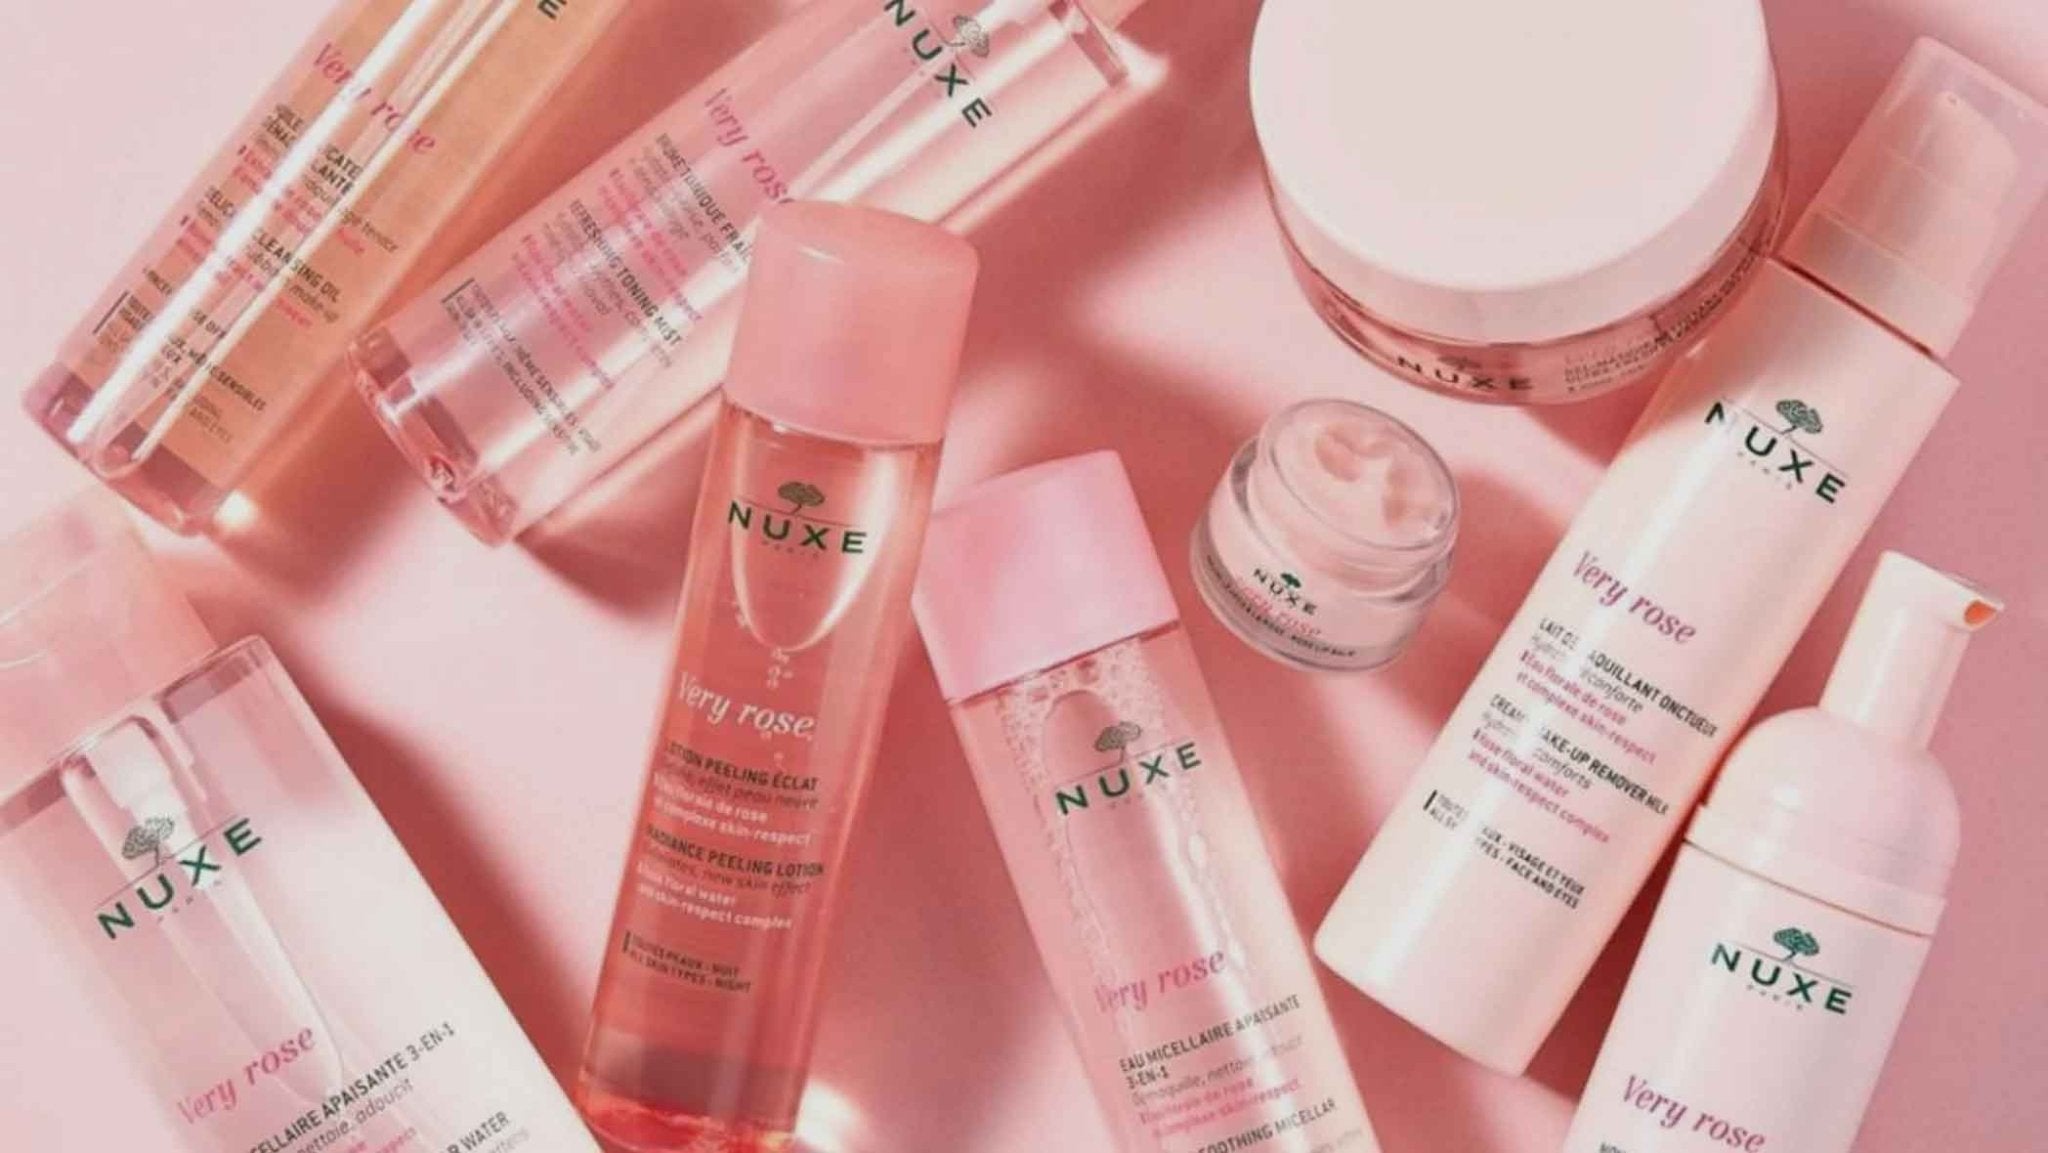 Unleash the power of rose - French Beauty Co.